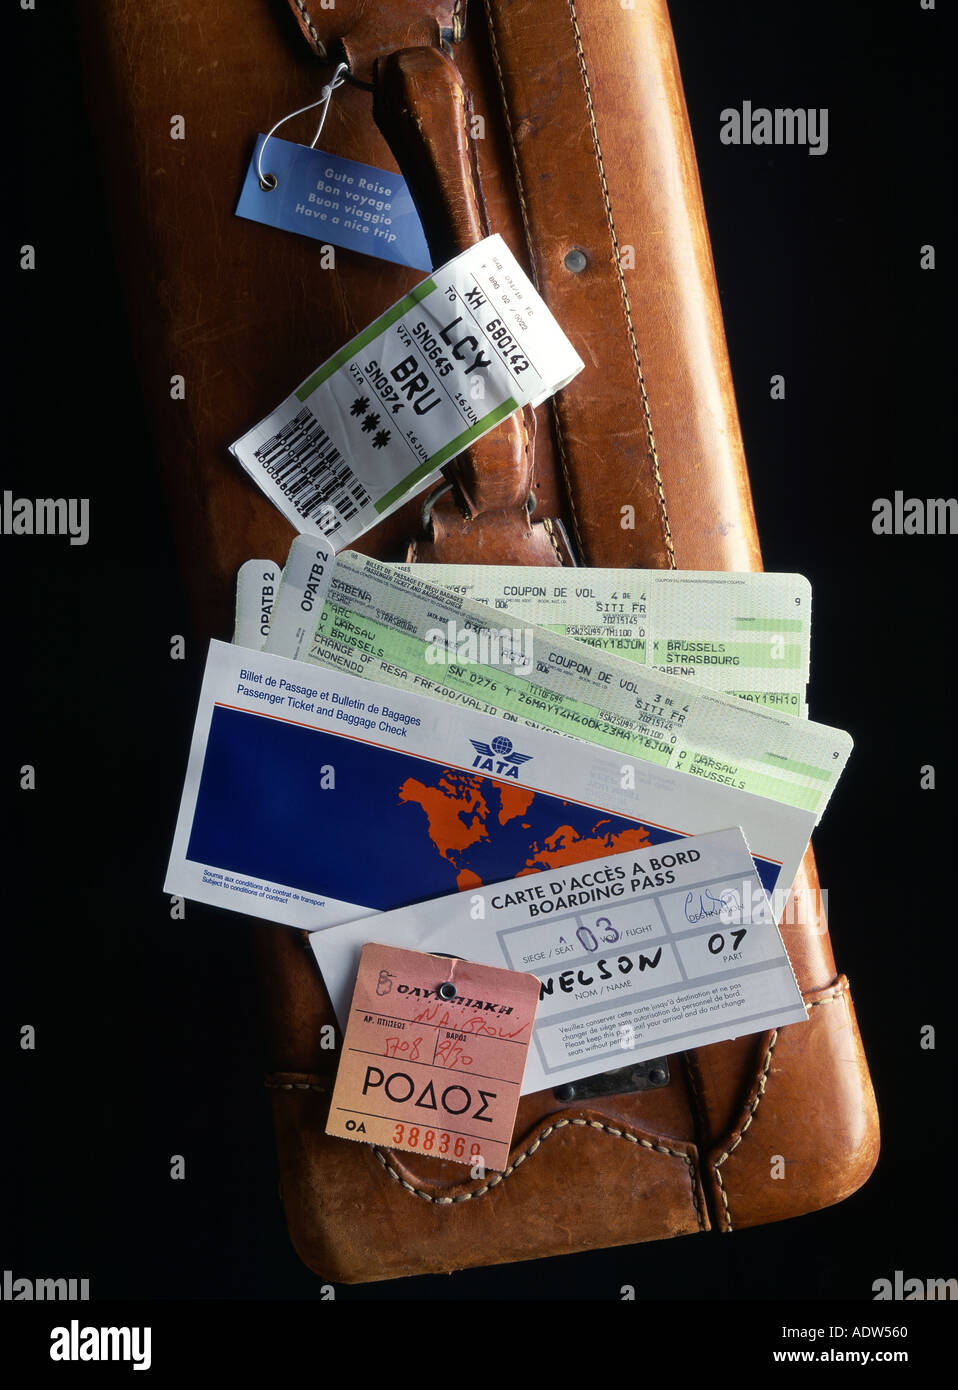 AIRLINE PASSENGER TICKETS, BOARDING PASSES, CHECKED LUGGAGE TAB, BAGGAGE LABELS ON TOP OF A LEATHER SUITCASE Stock Photo